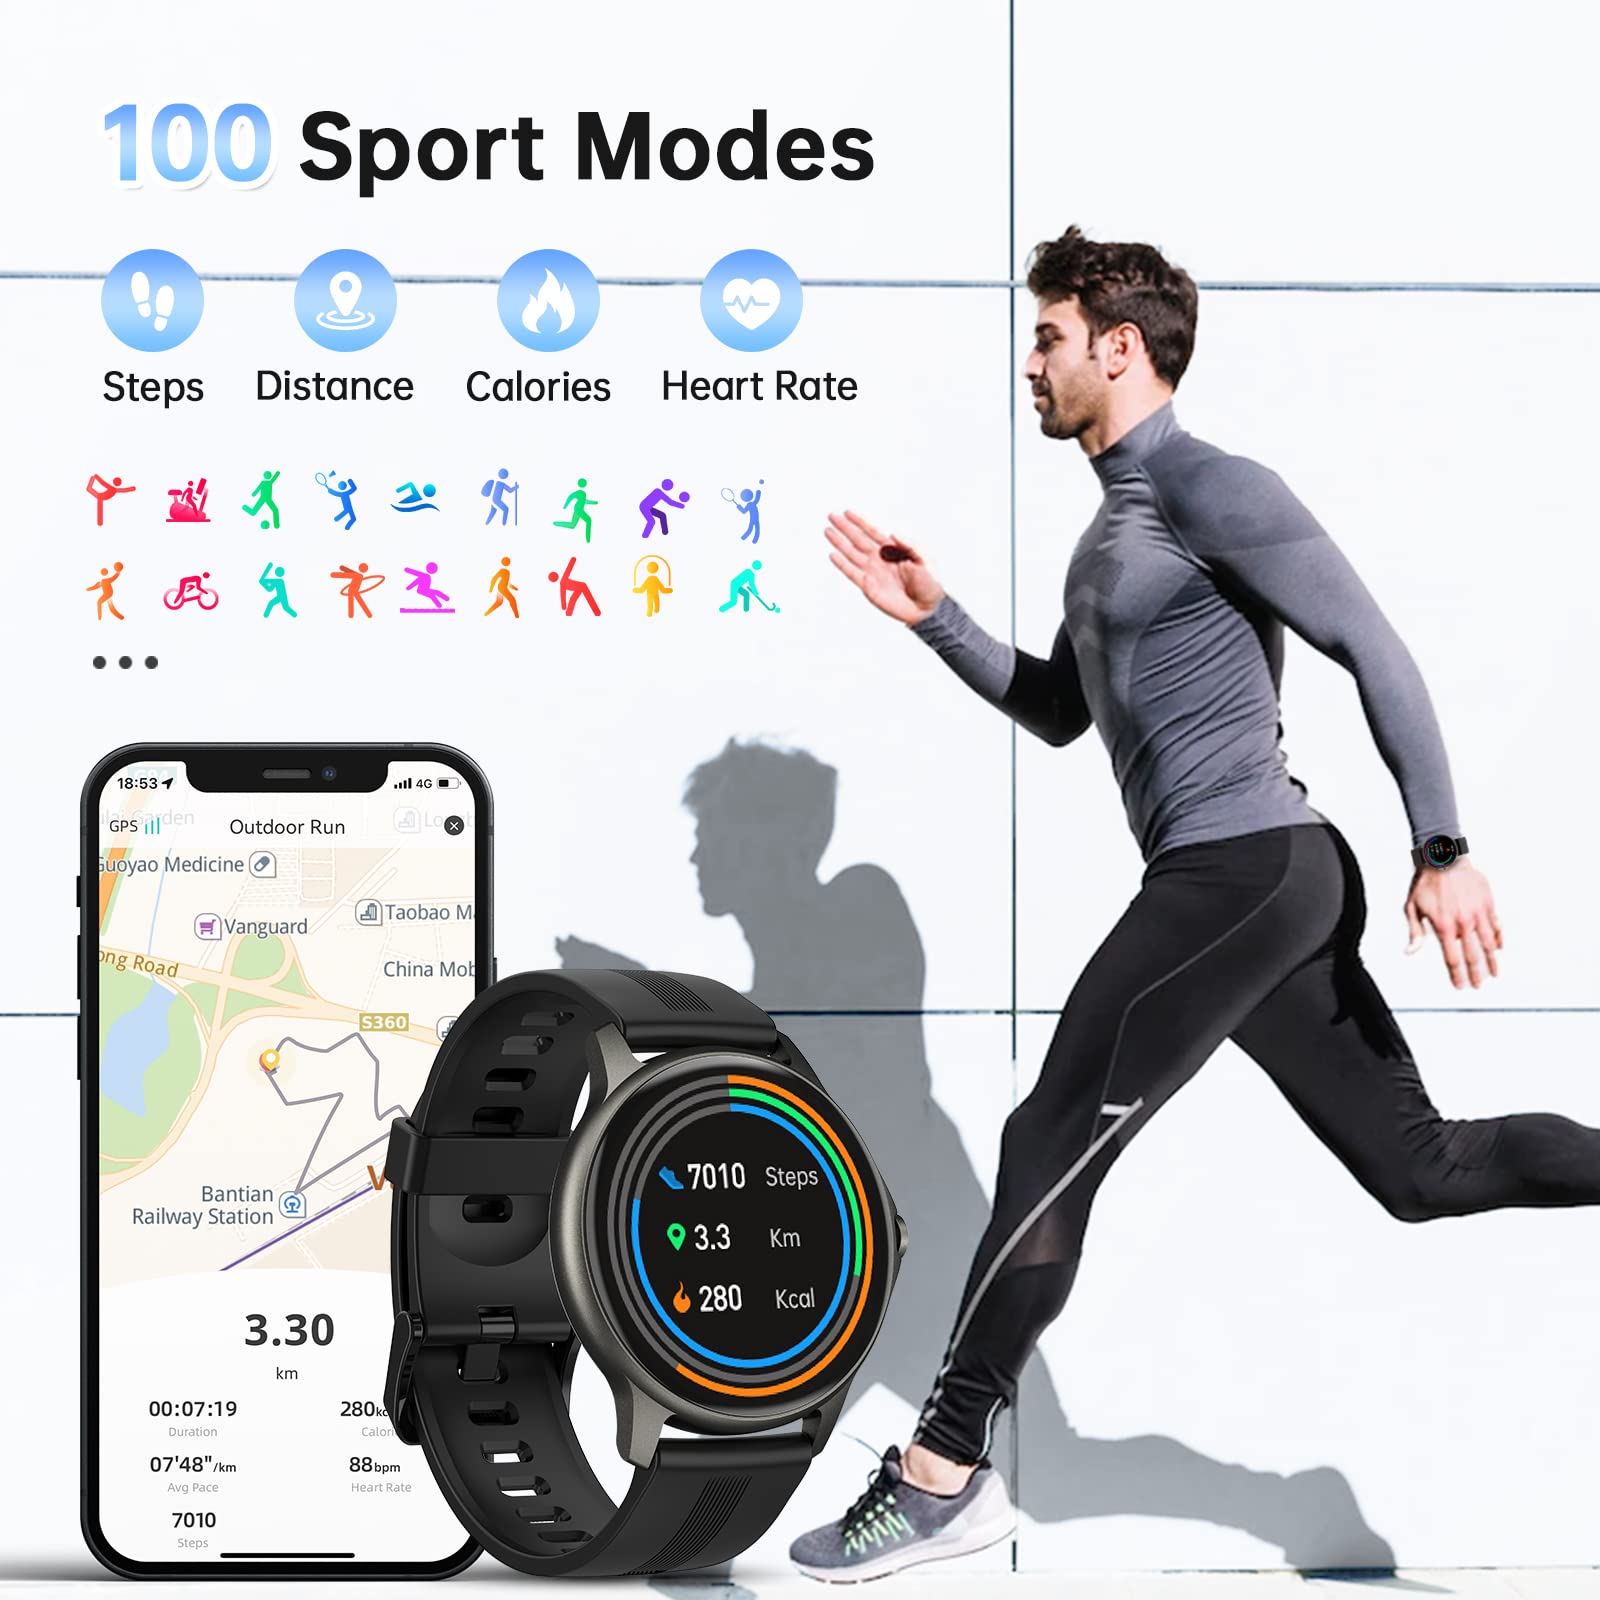 Fitpolo Smartwatch LW51（USE CODE:LW51 to get $34 off）